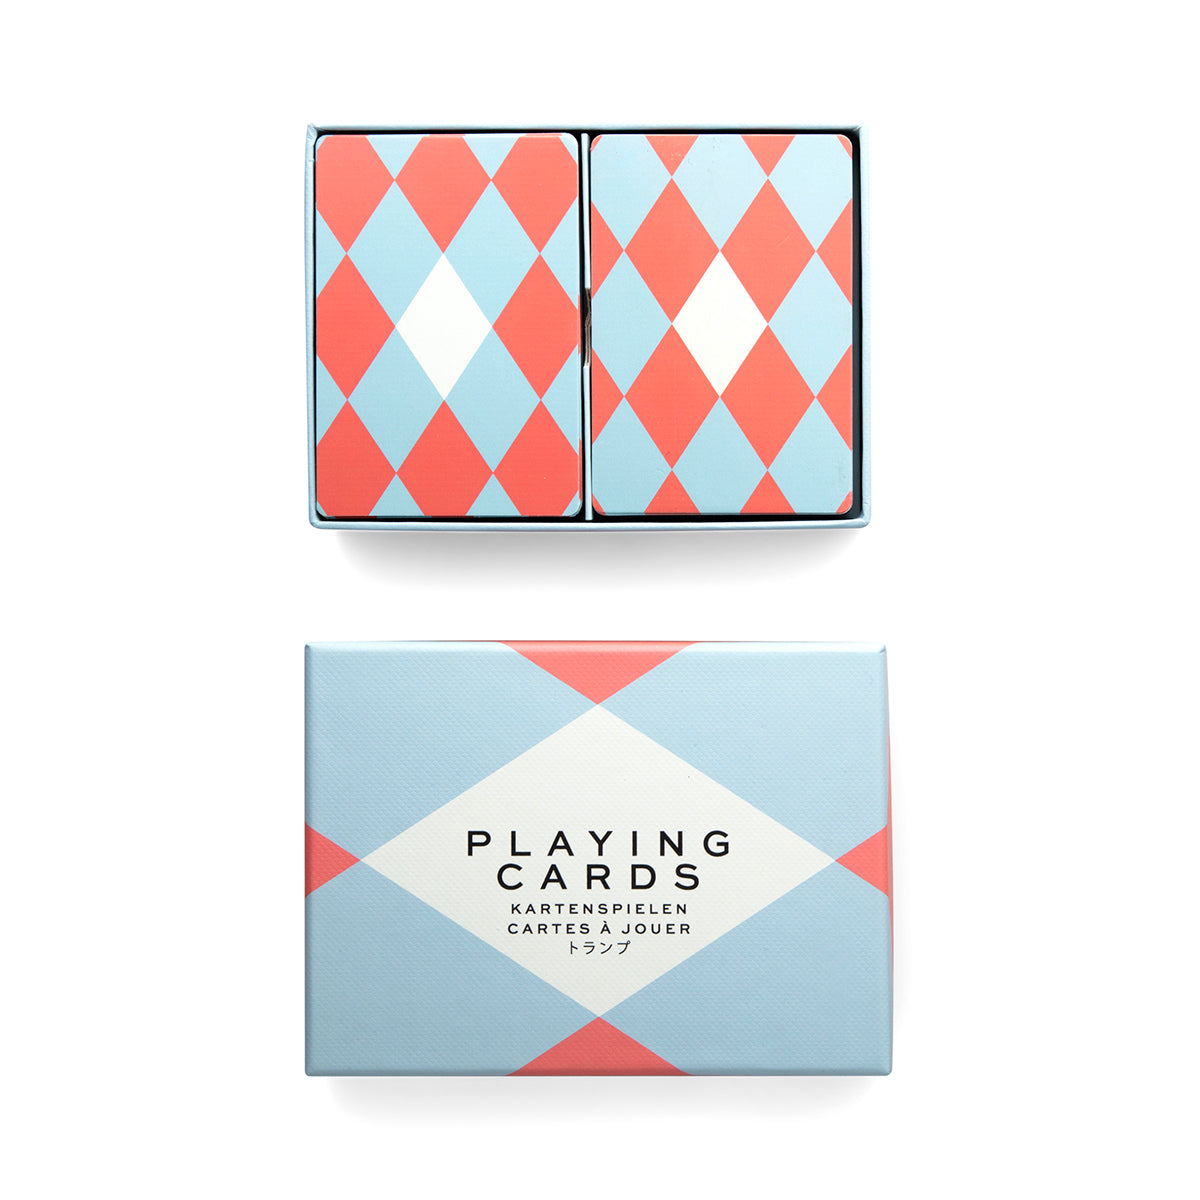 Printworks Play Games Double Playing Cards